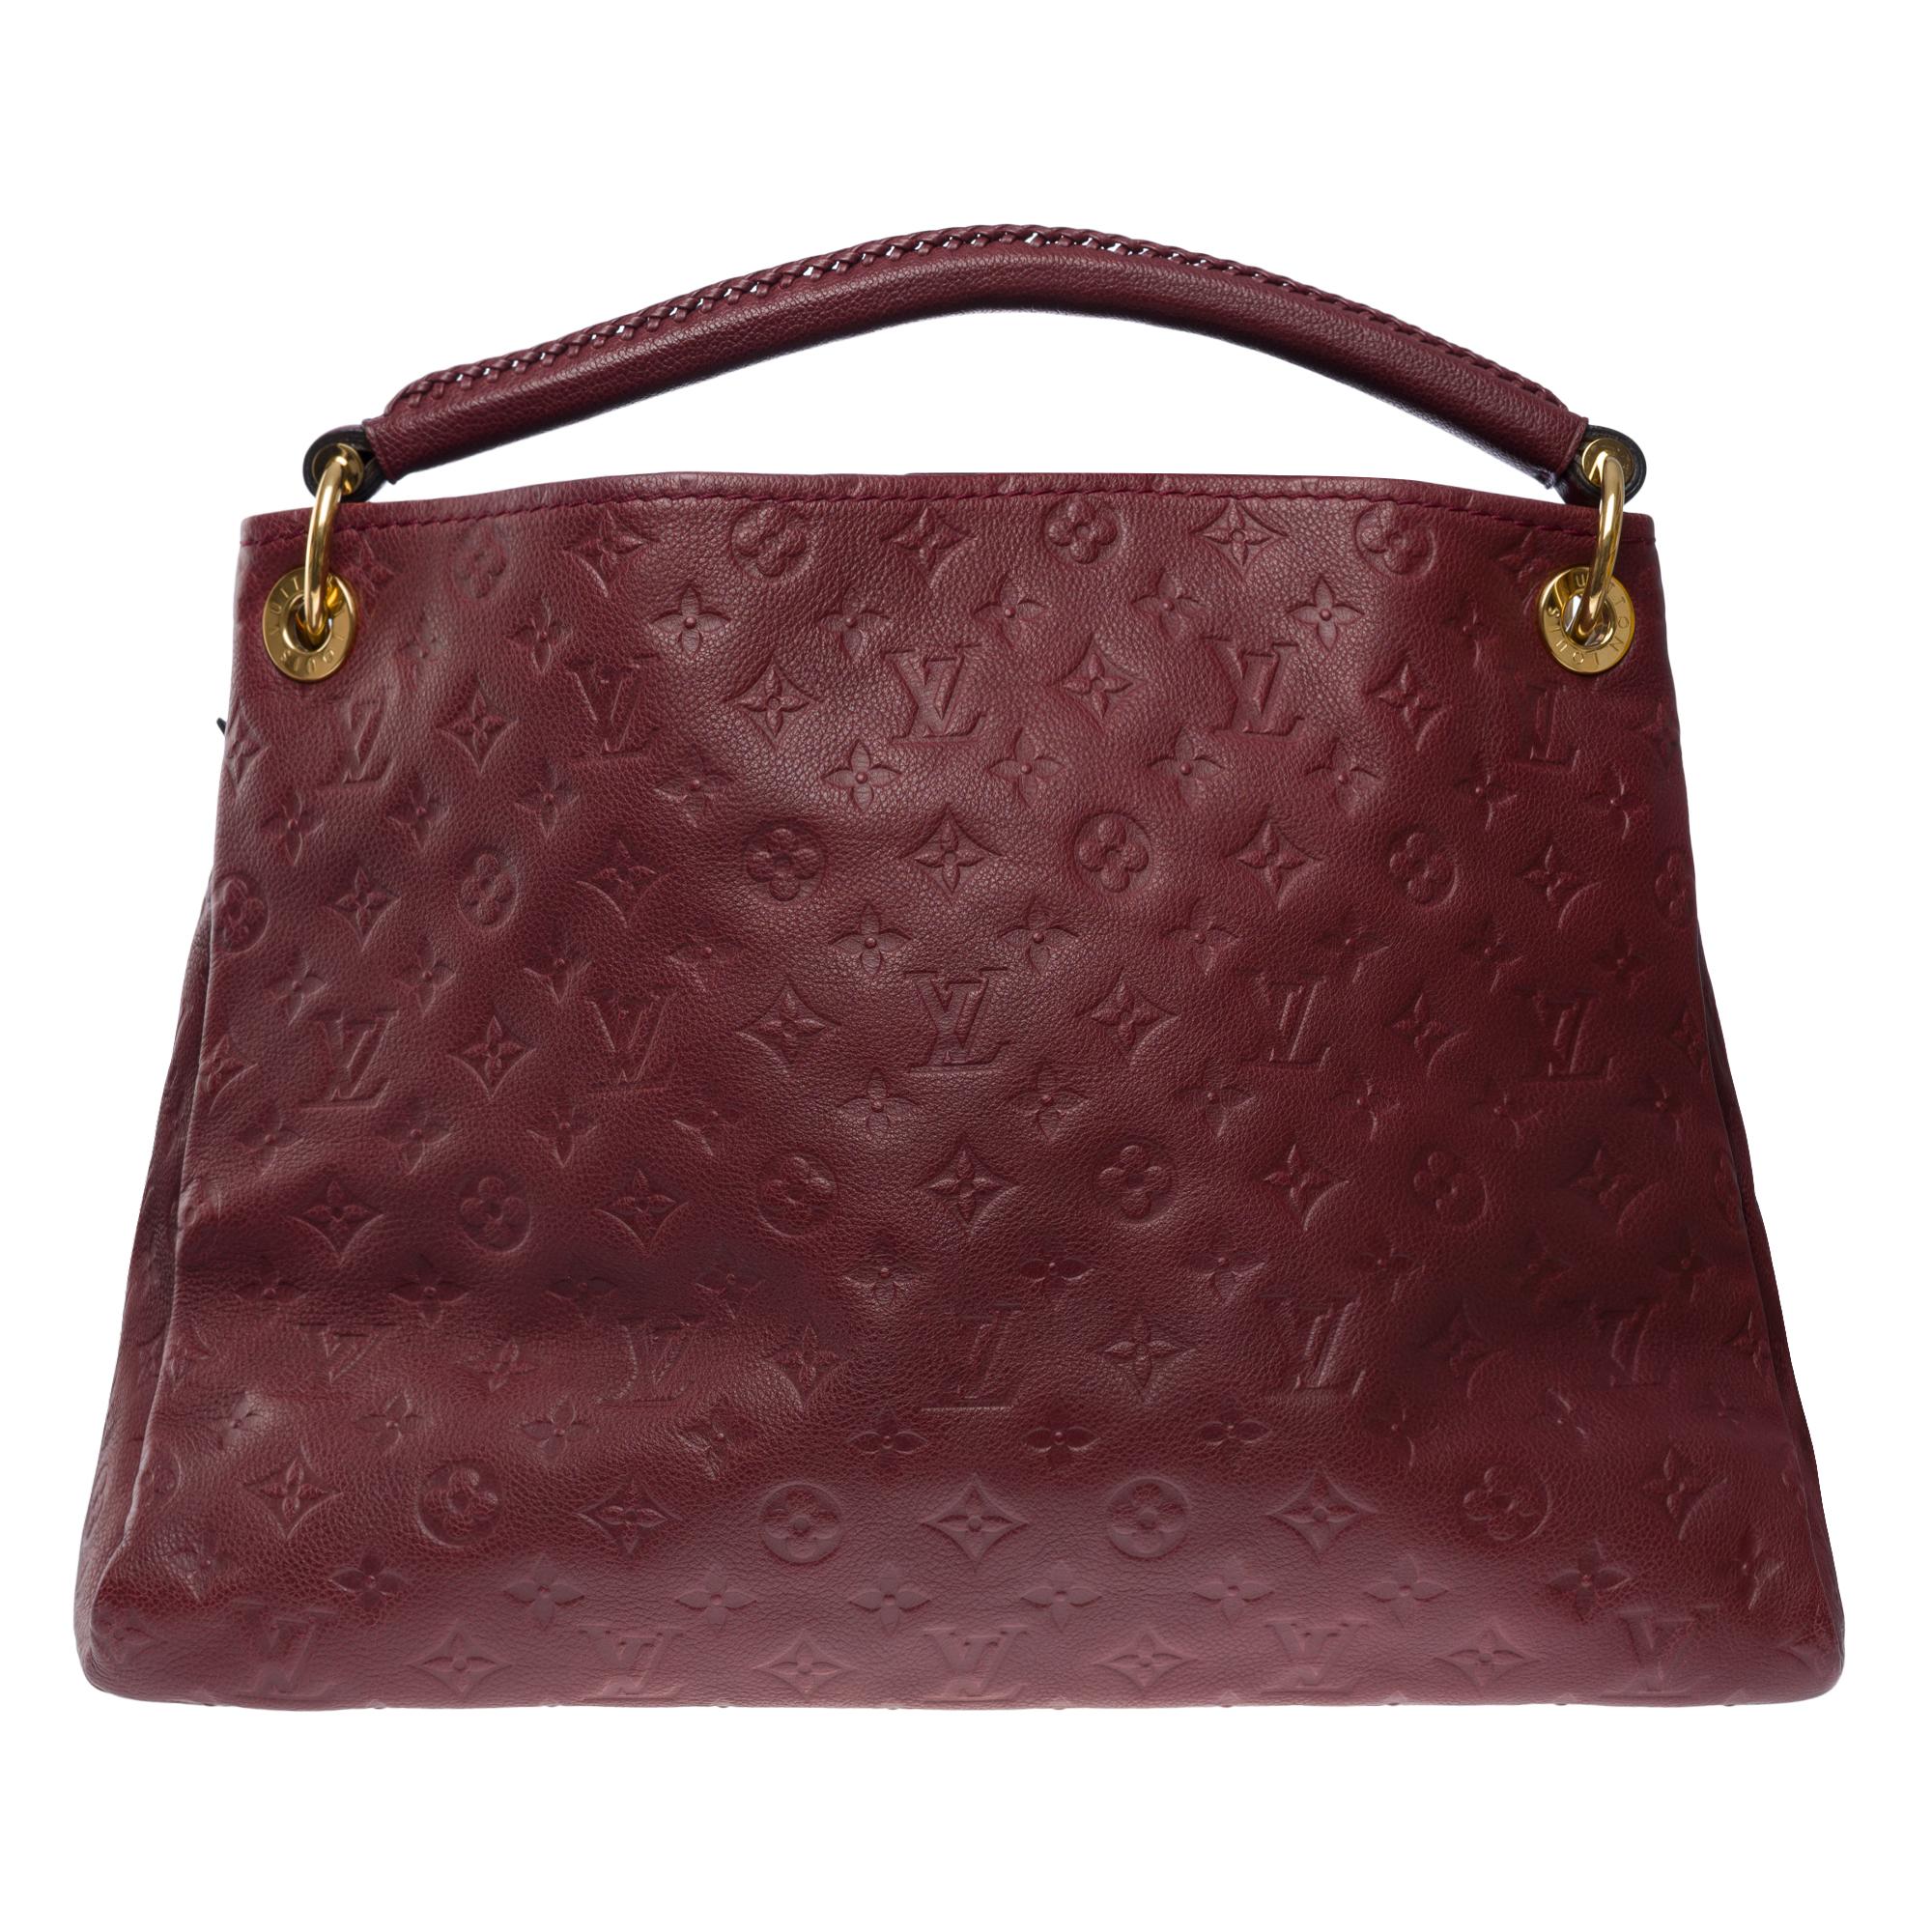 Beautiful Louis Vuitton Artsy MM Tote bag inprint Burgundy monogram calfskin leather , gold metal hardware, a burgundy braided leather handle for a hand or shoulder carry

Interior lining in striped burgundy canvas, one zip pocket, 2 double patch